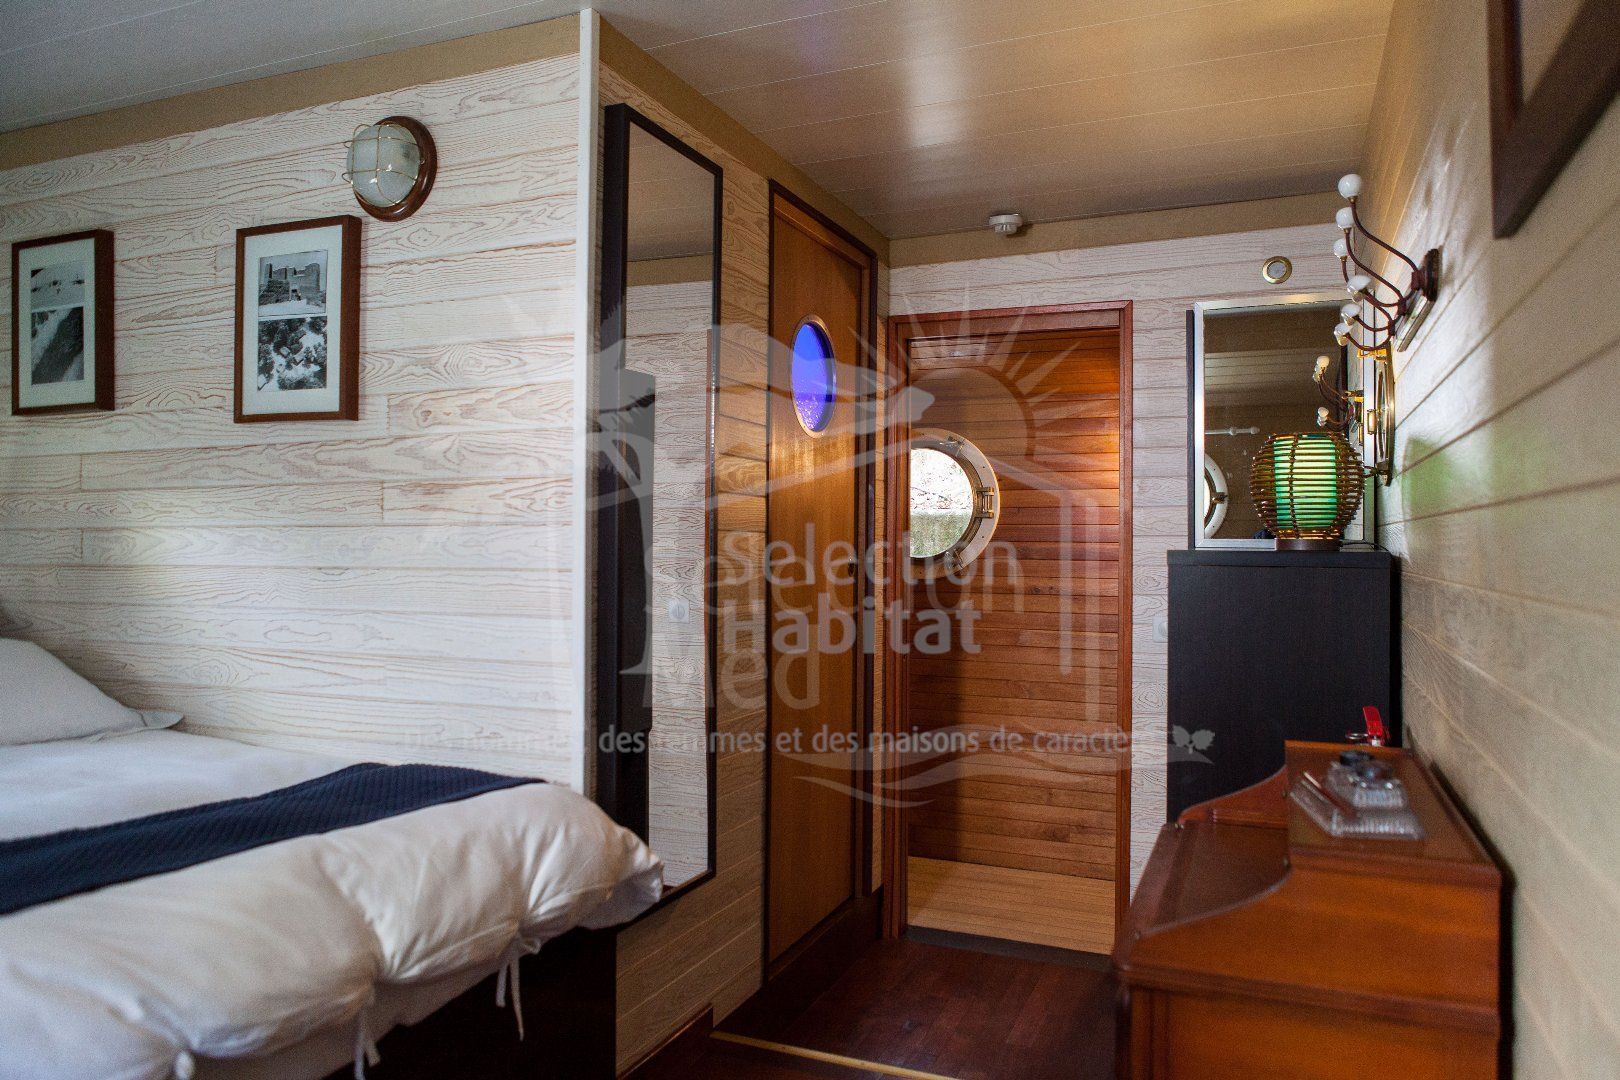 Carcassonne: luxury barge with 4 cabins, deck with terraces and SPA